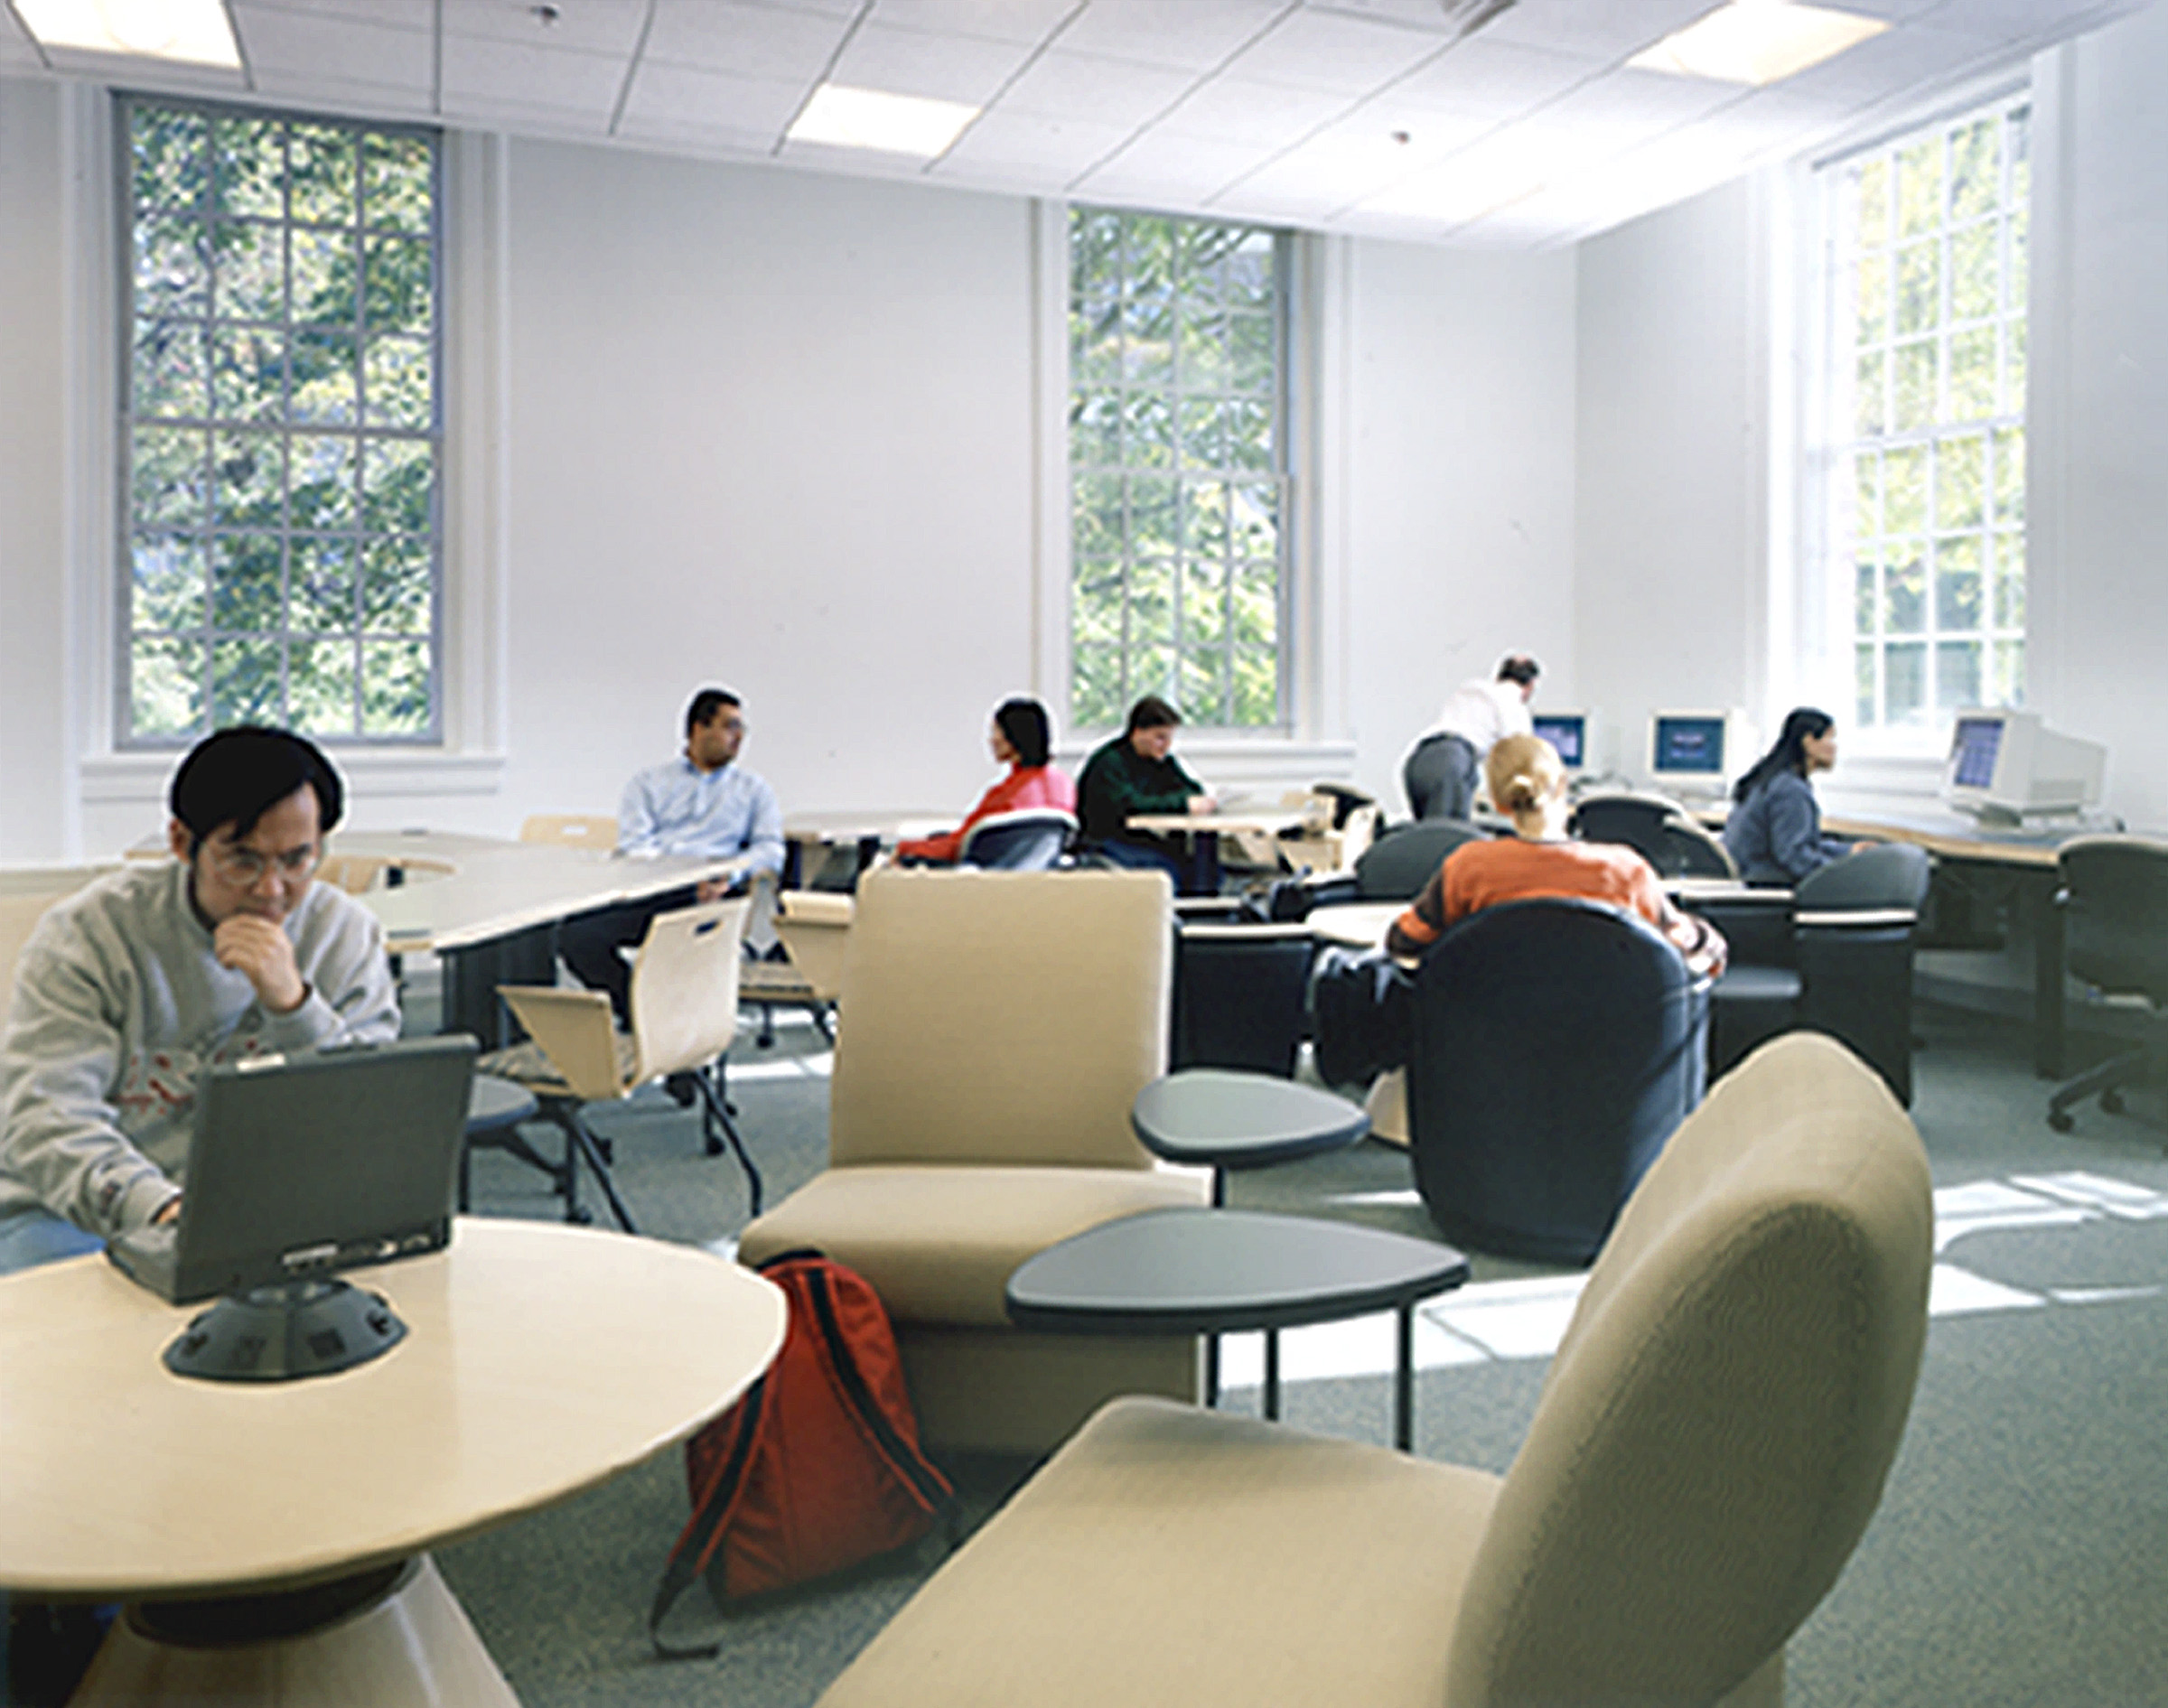 RPI - Interior - Lounge with Students.jpg